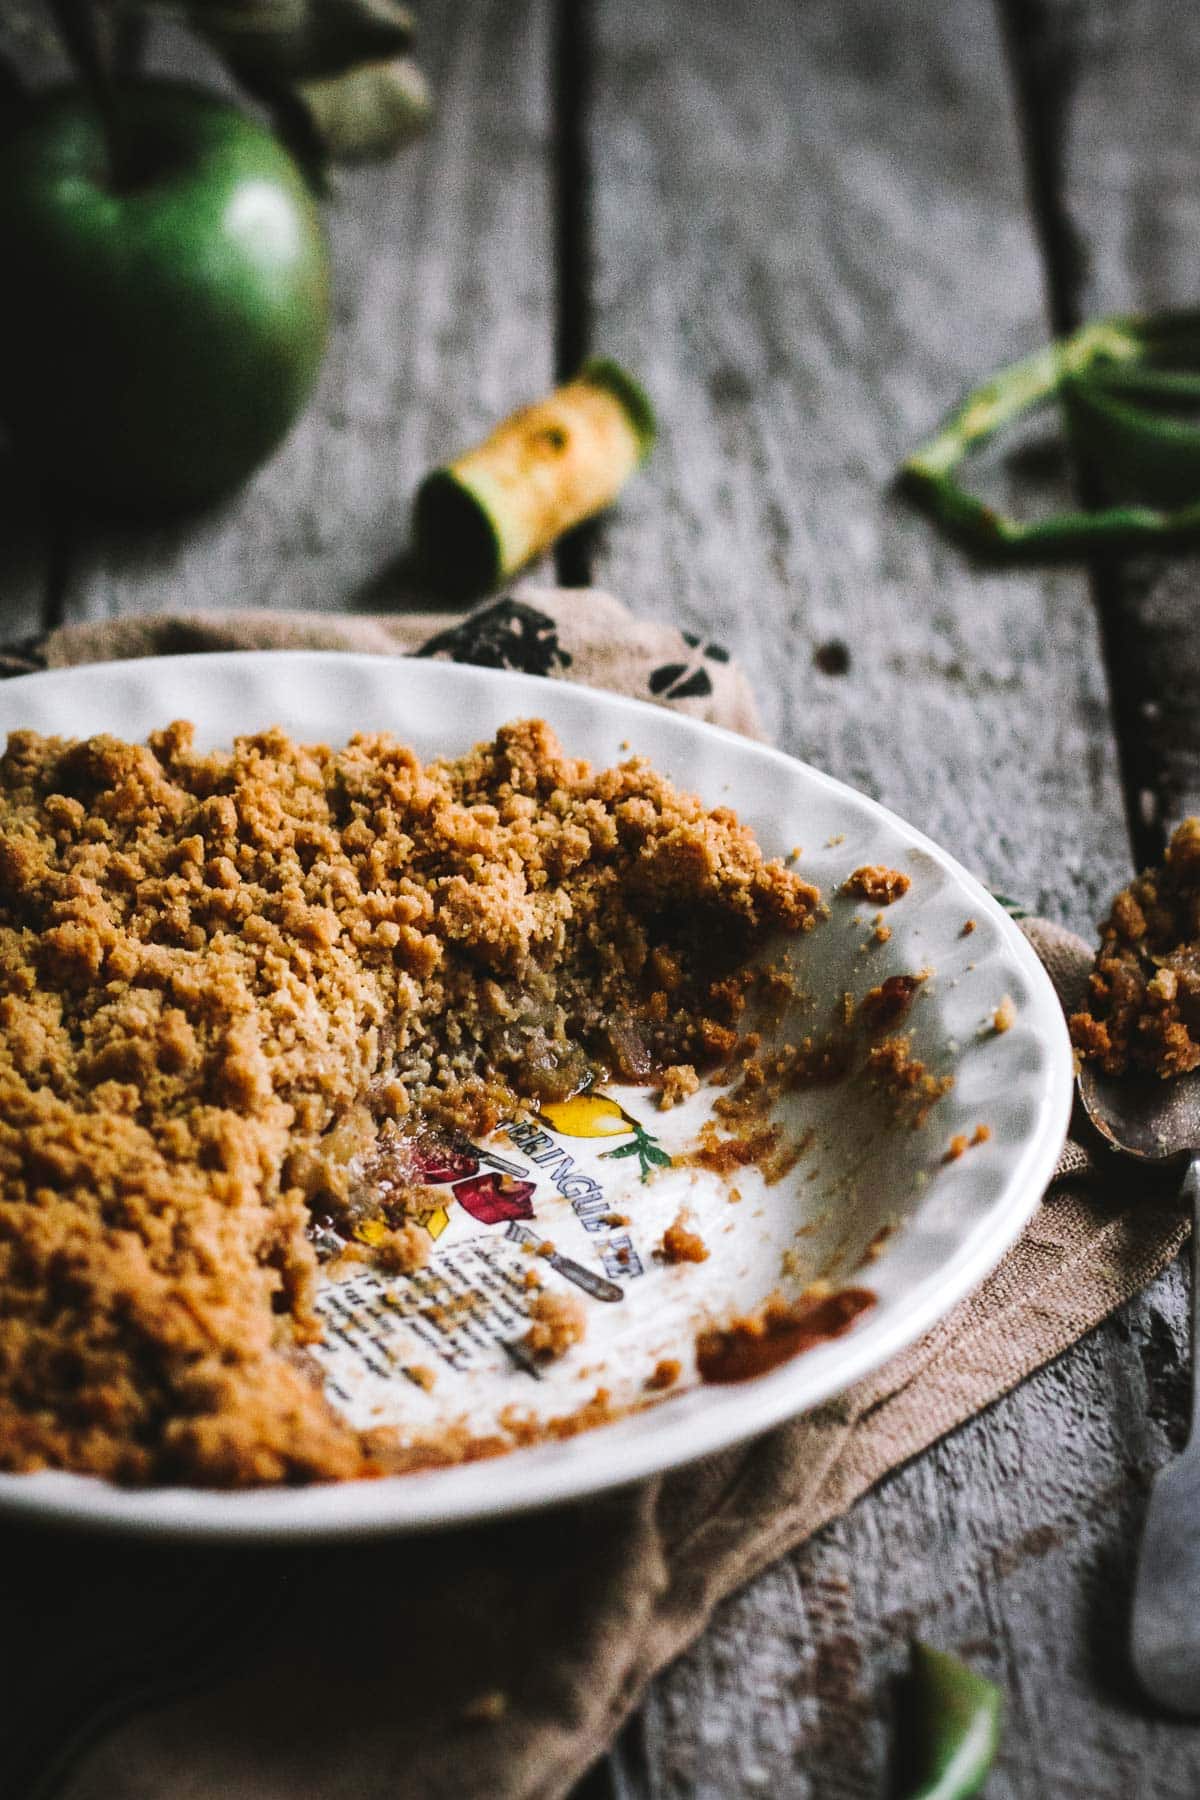 Apple crumble baked in a pie dish.